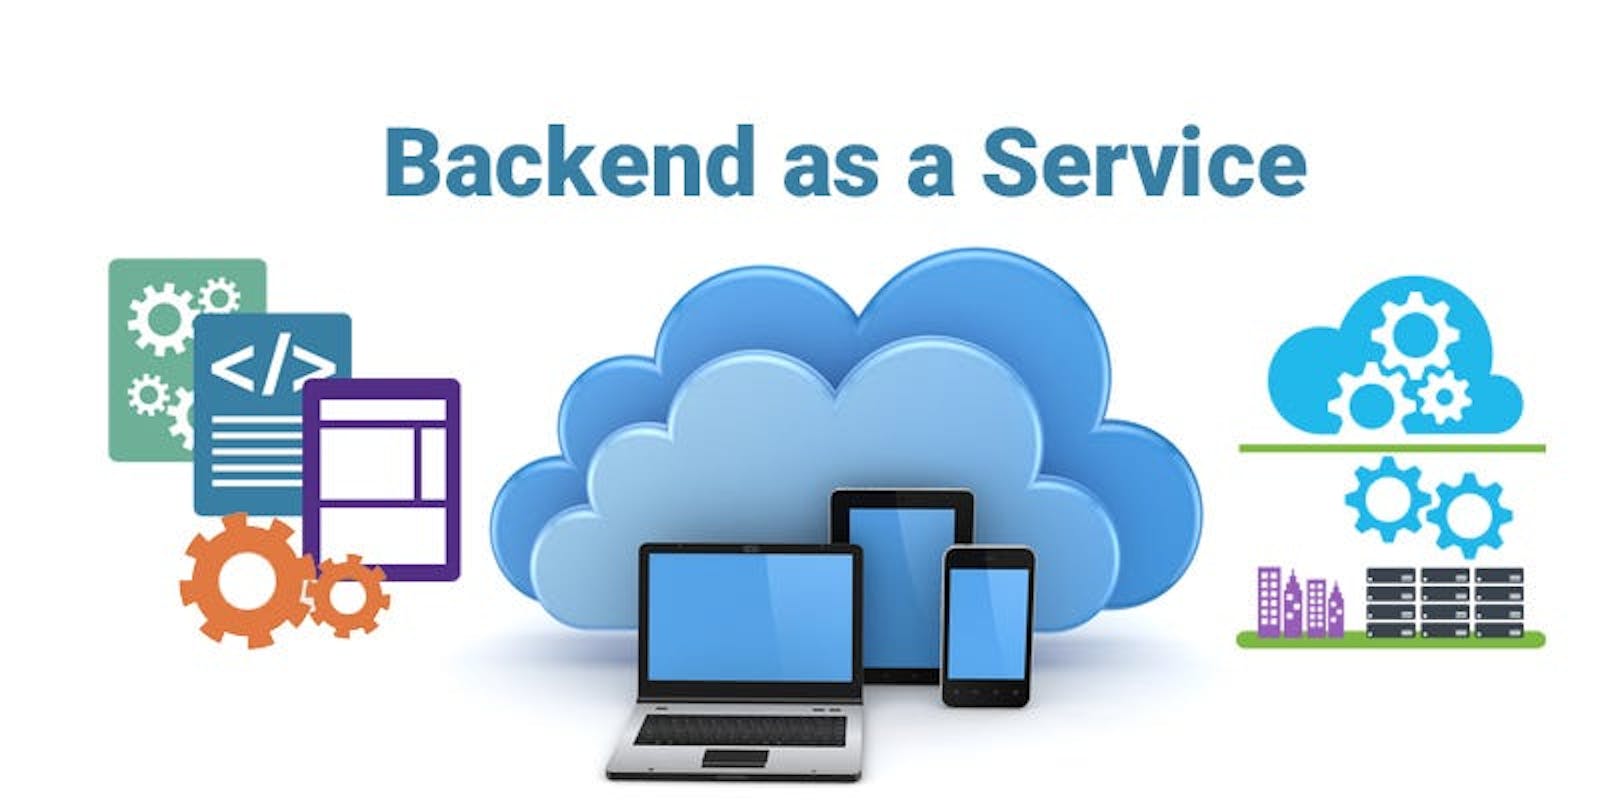 Backend-As-A-Service Market Key Players, SWOT Analysis, Key Indicators and Forecast to 2033